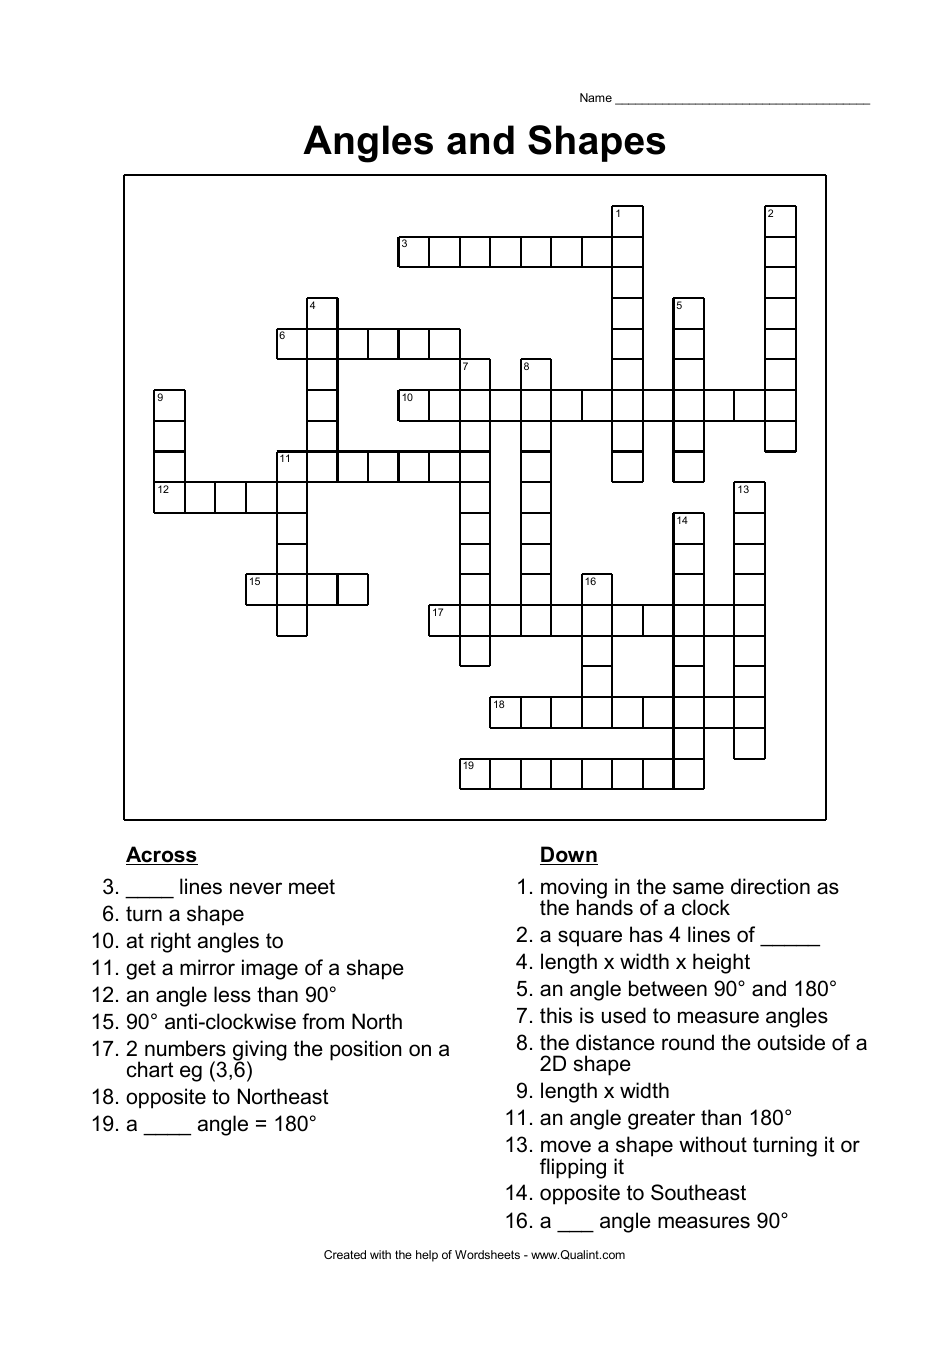 Angles and Shapes Crossword Puzzle Template With Answers, Angles and Shapes Word Search Puzzle Template With Answers, Page 1